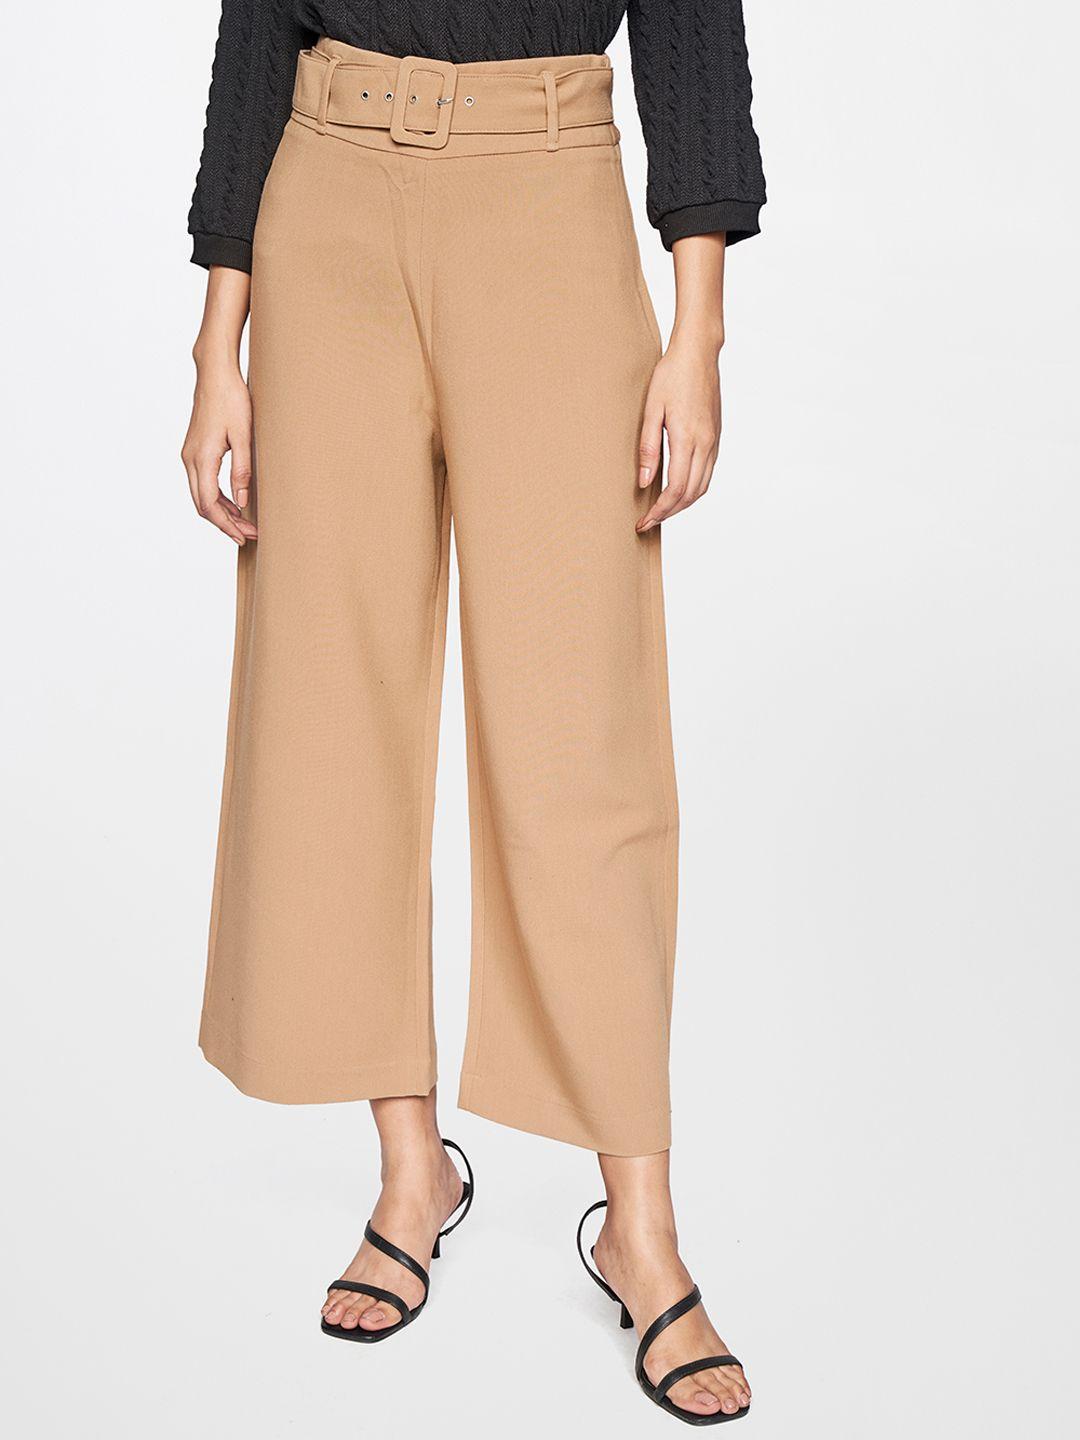 and-women-beige-cropped-trousers